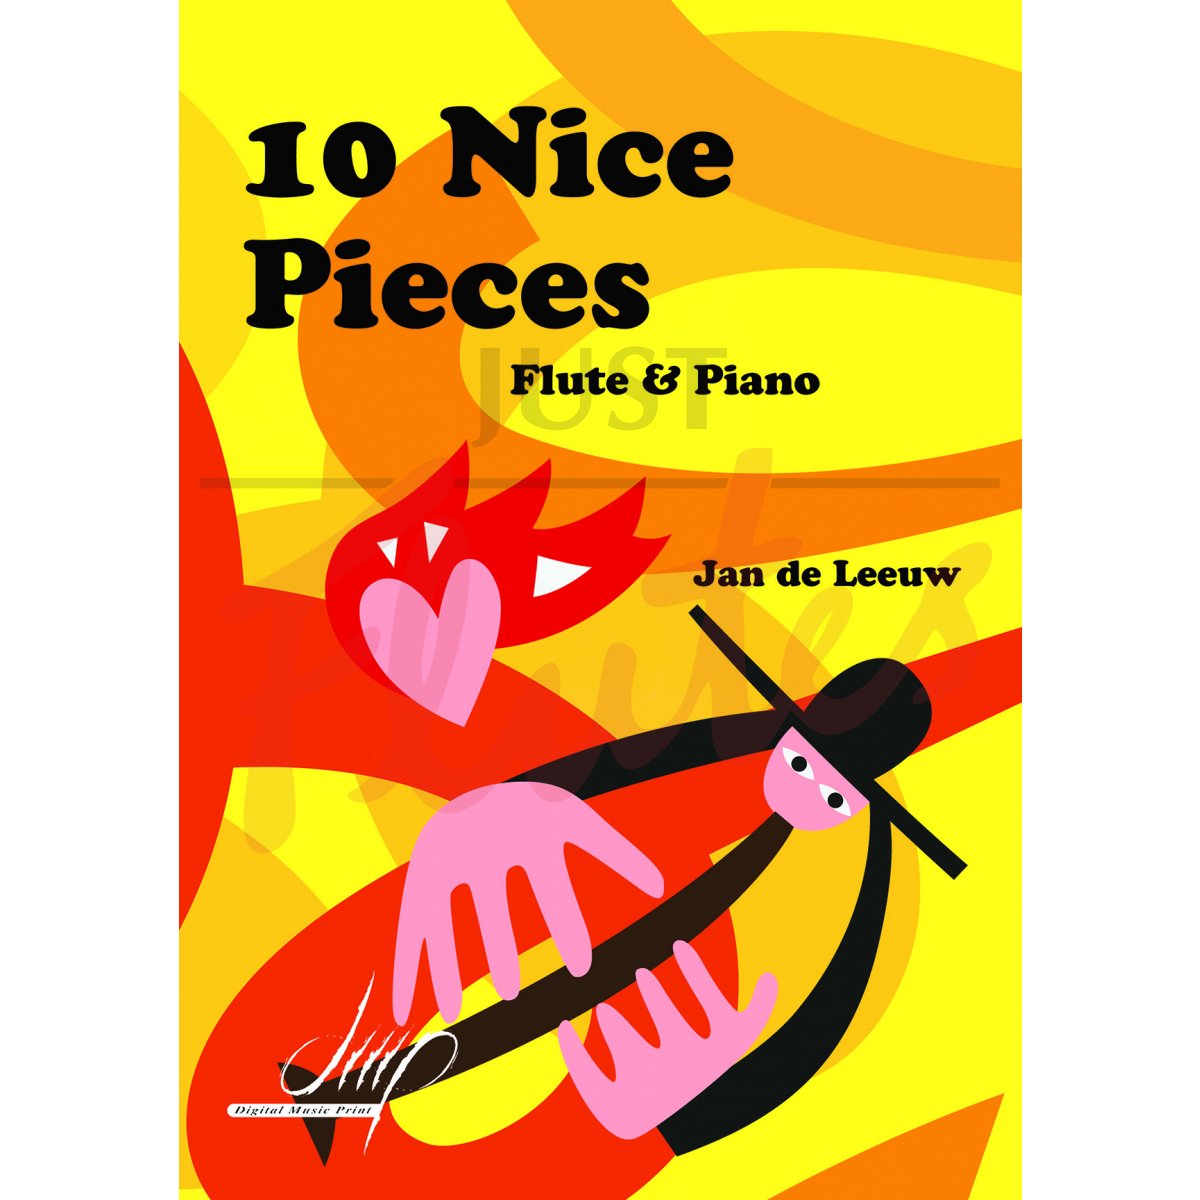 10 Nice Pieces for flute and piano